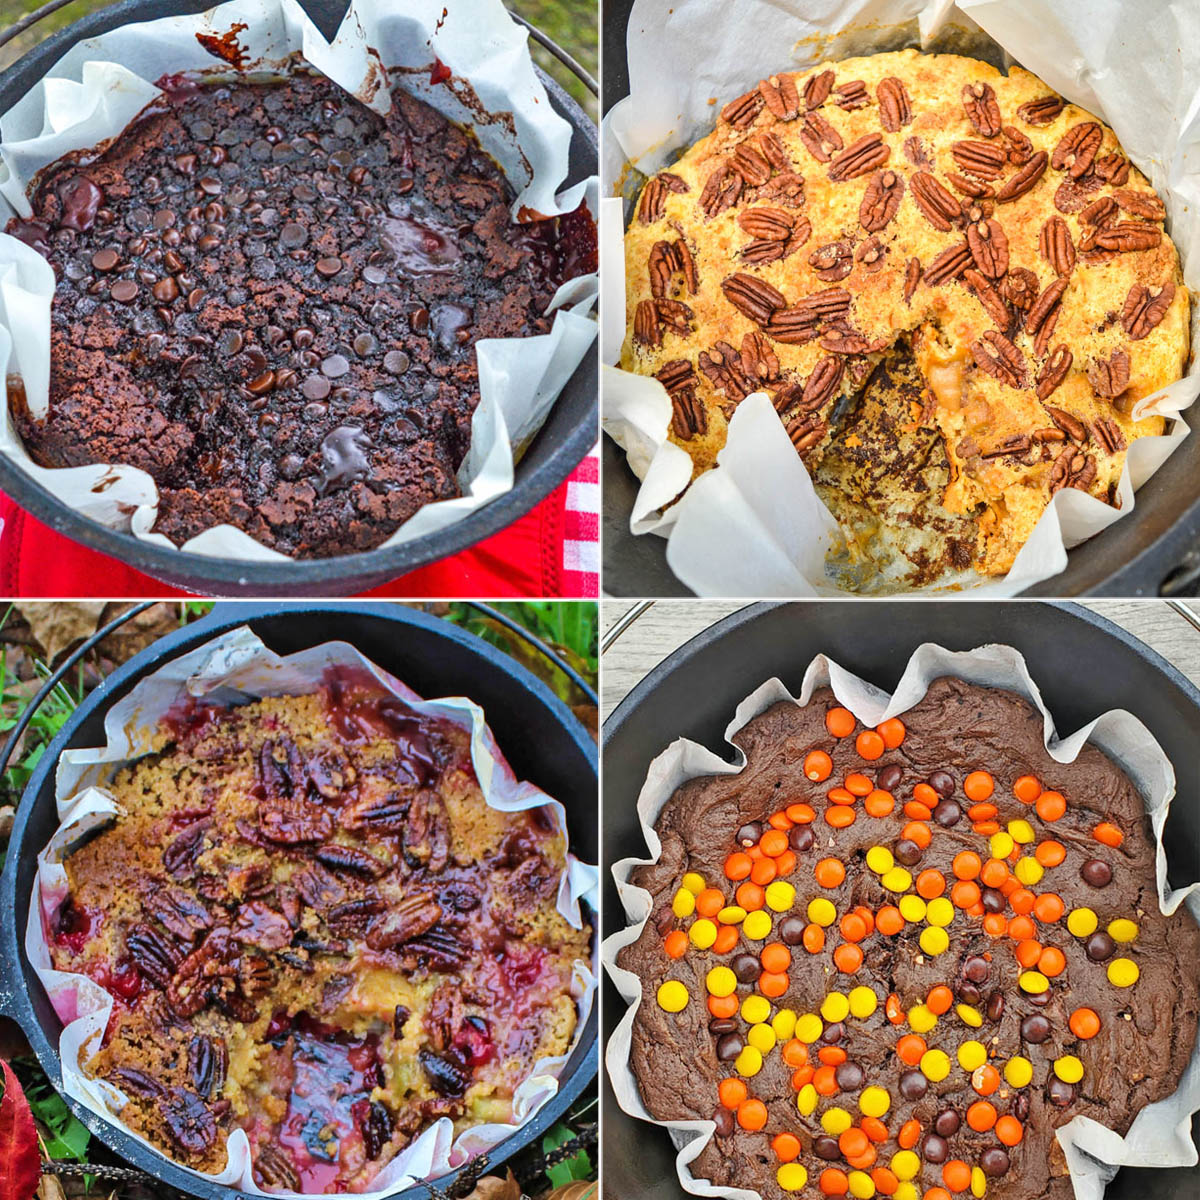 Dutch Oven Brownies- Brookies Recipe - Simple Dessert for Camping